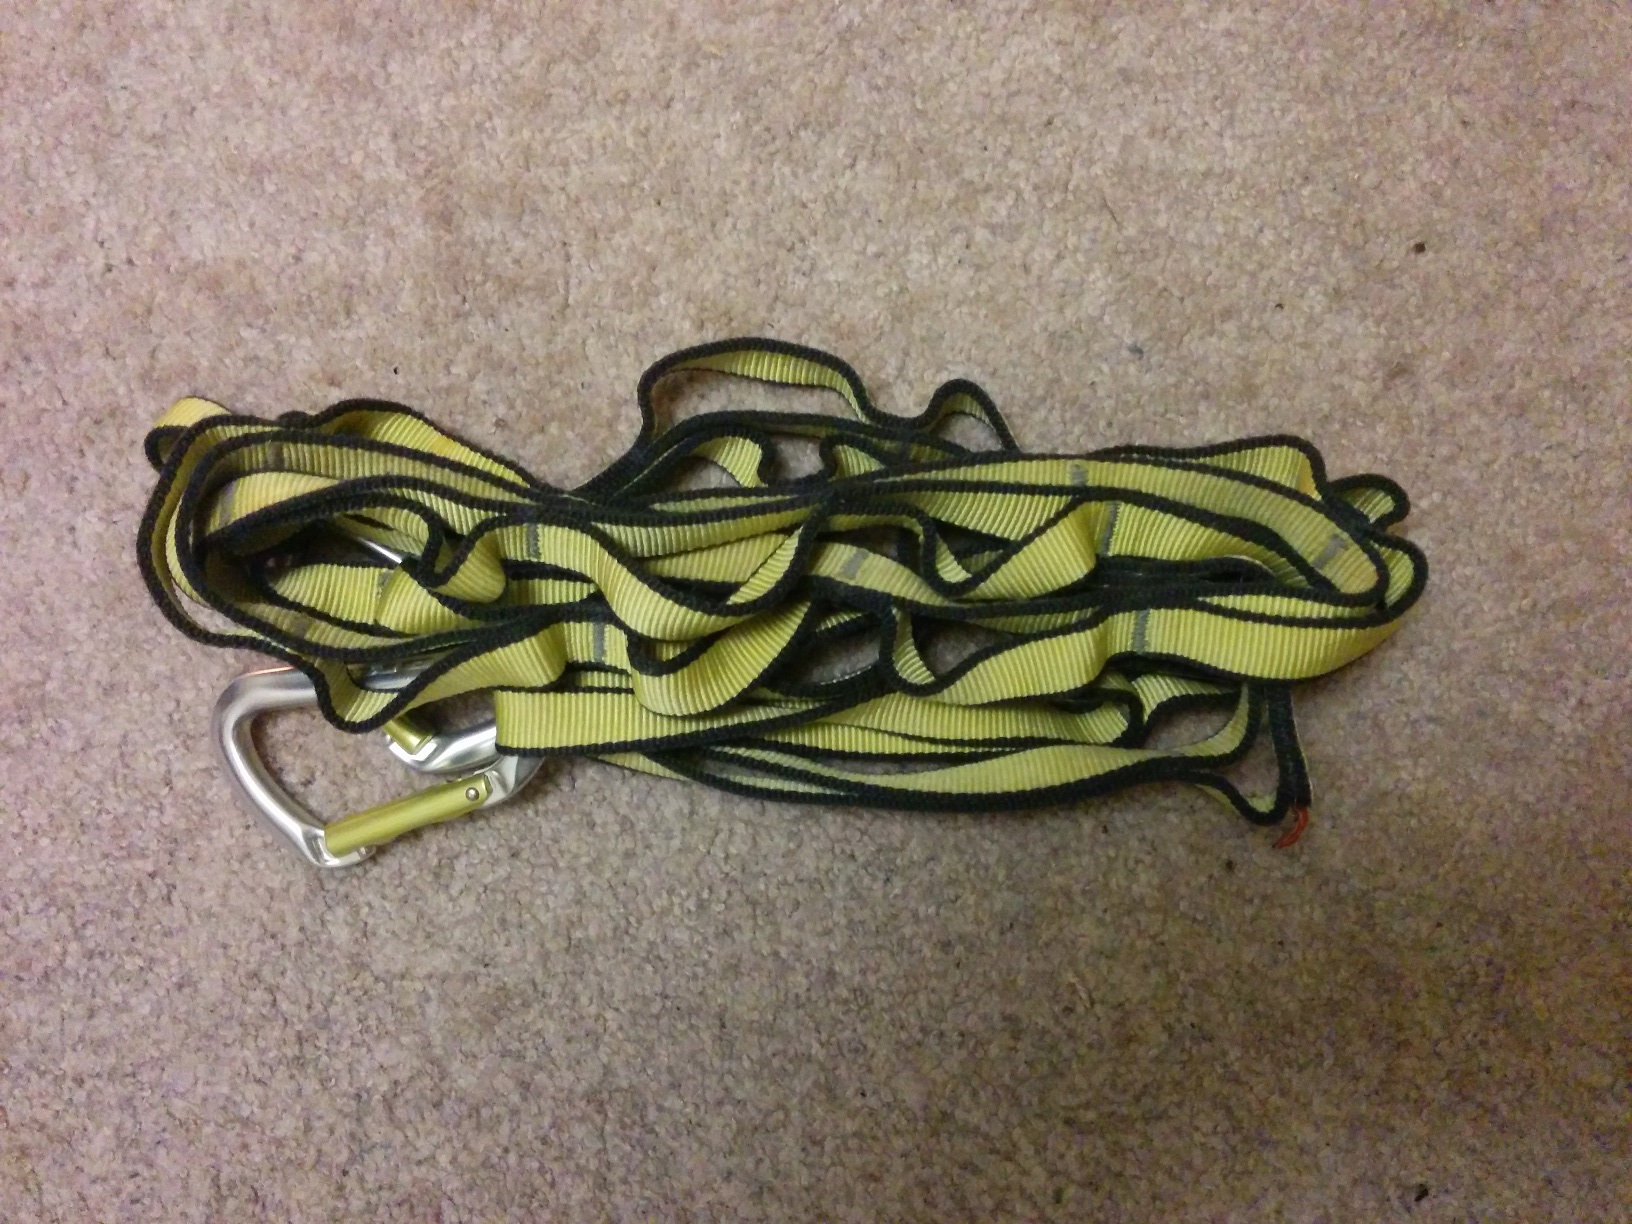 The yellow straps, with caribiners still attached to one side of them, folded over several times into a small bundle.